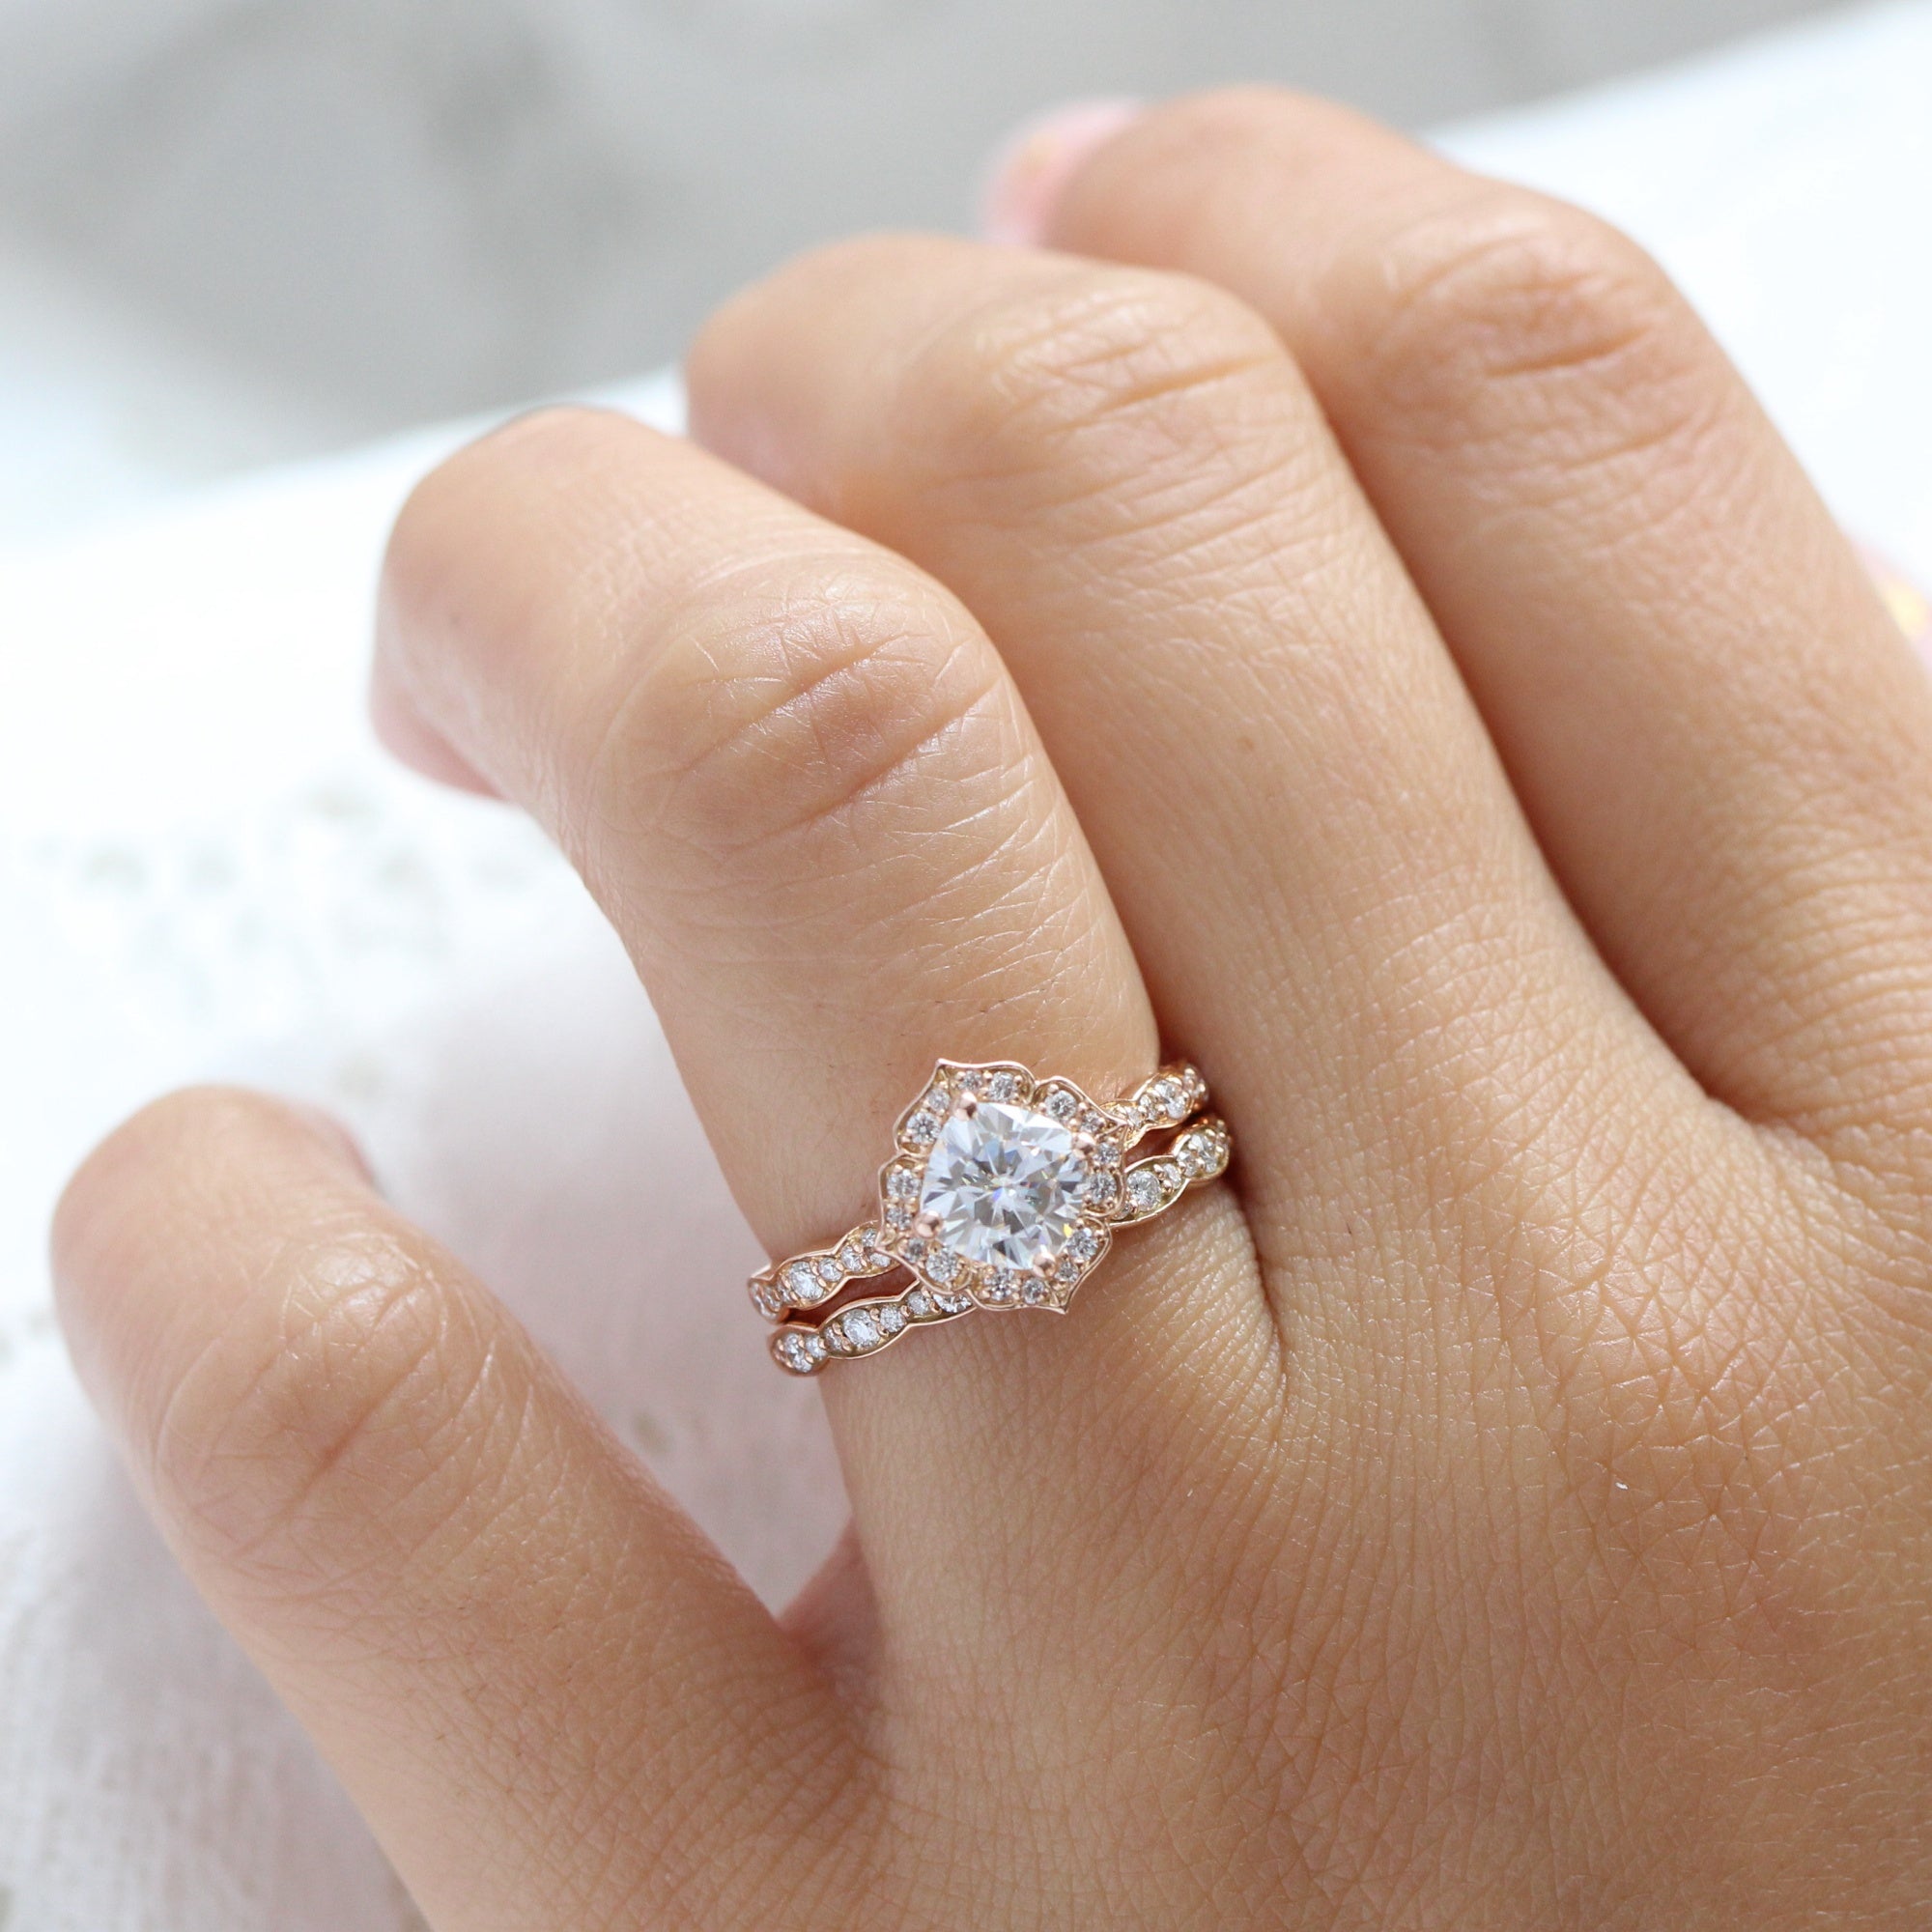 Vintage style moissanite diamond engagement ring rose gold bridal set by la more design jewelry